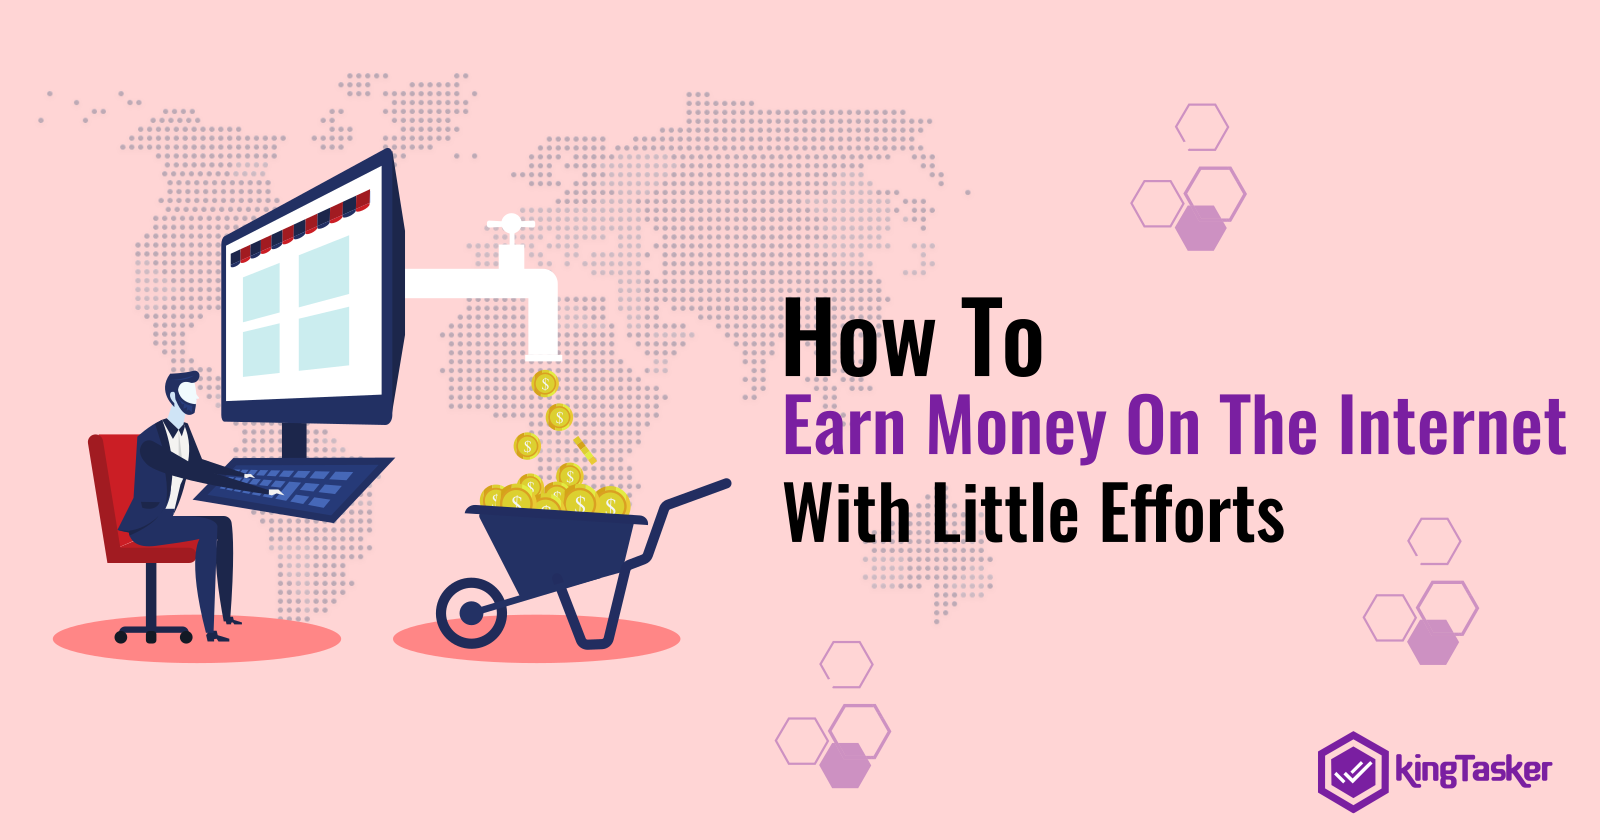 How To Earn Money On The Internet With Little Efforts